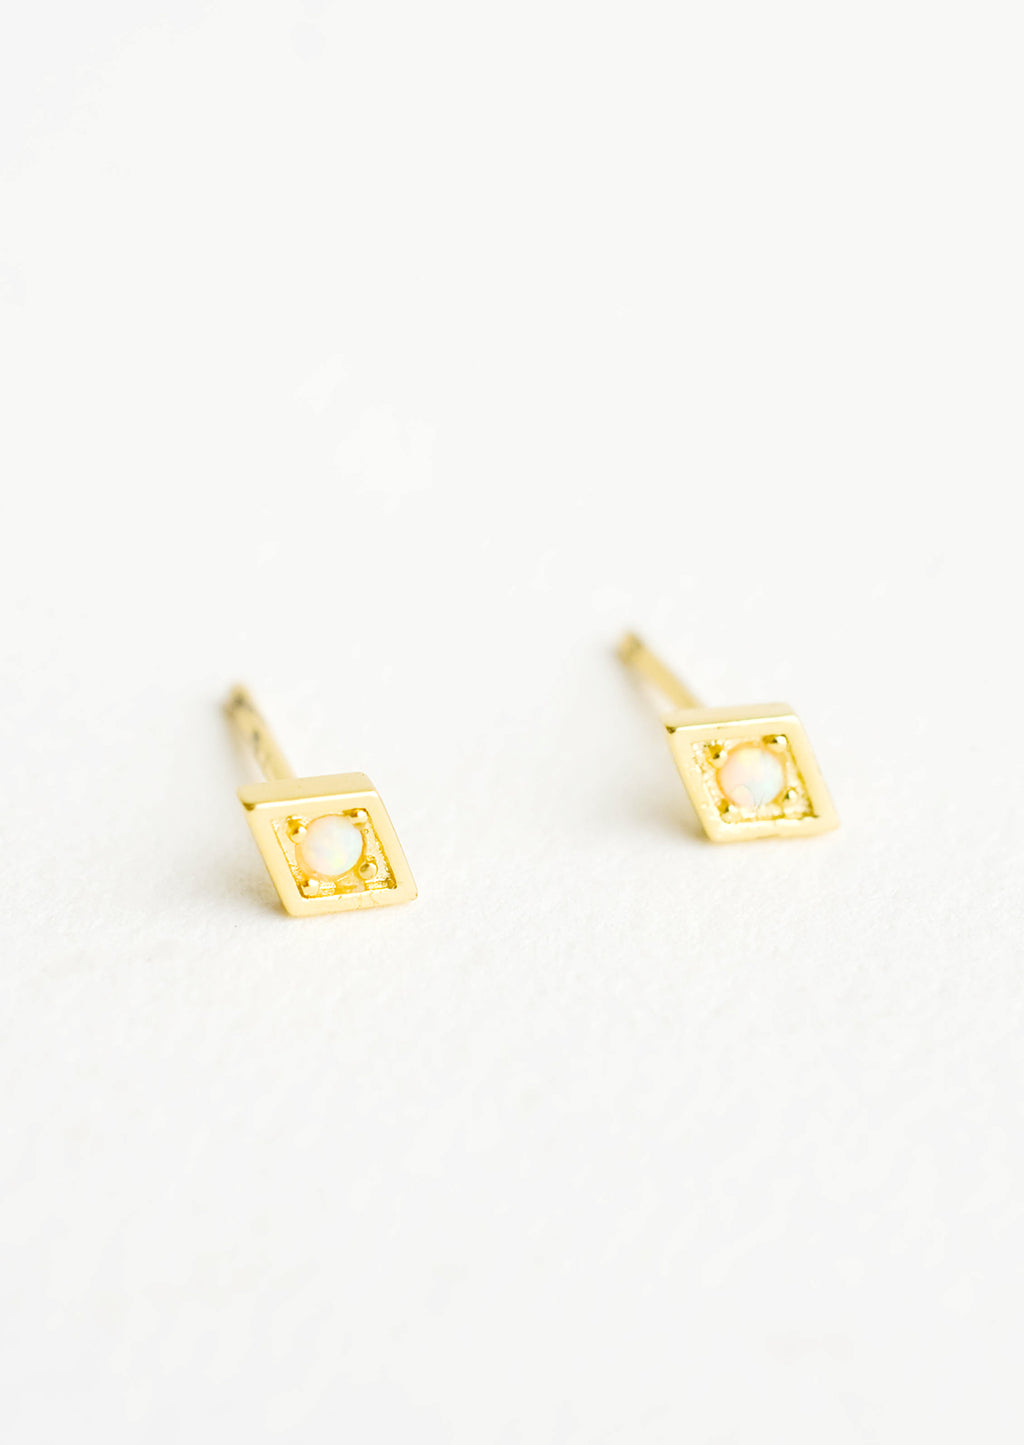 Diamond: Diamond shaped stud earrings in gold finish, with small round opal stone inset.